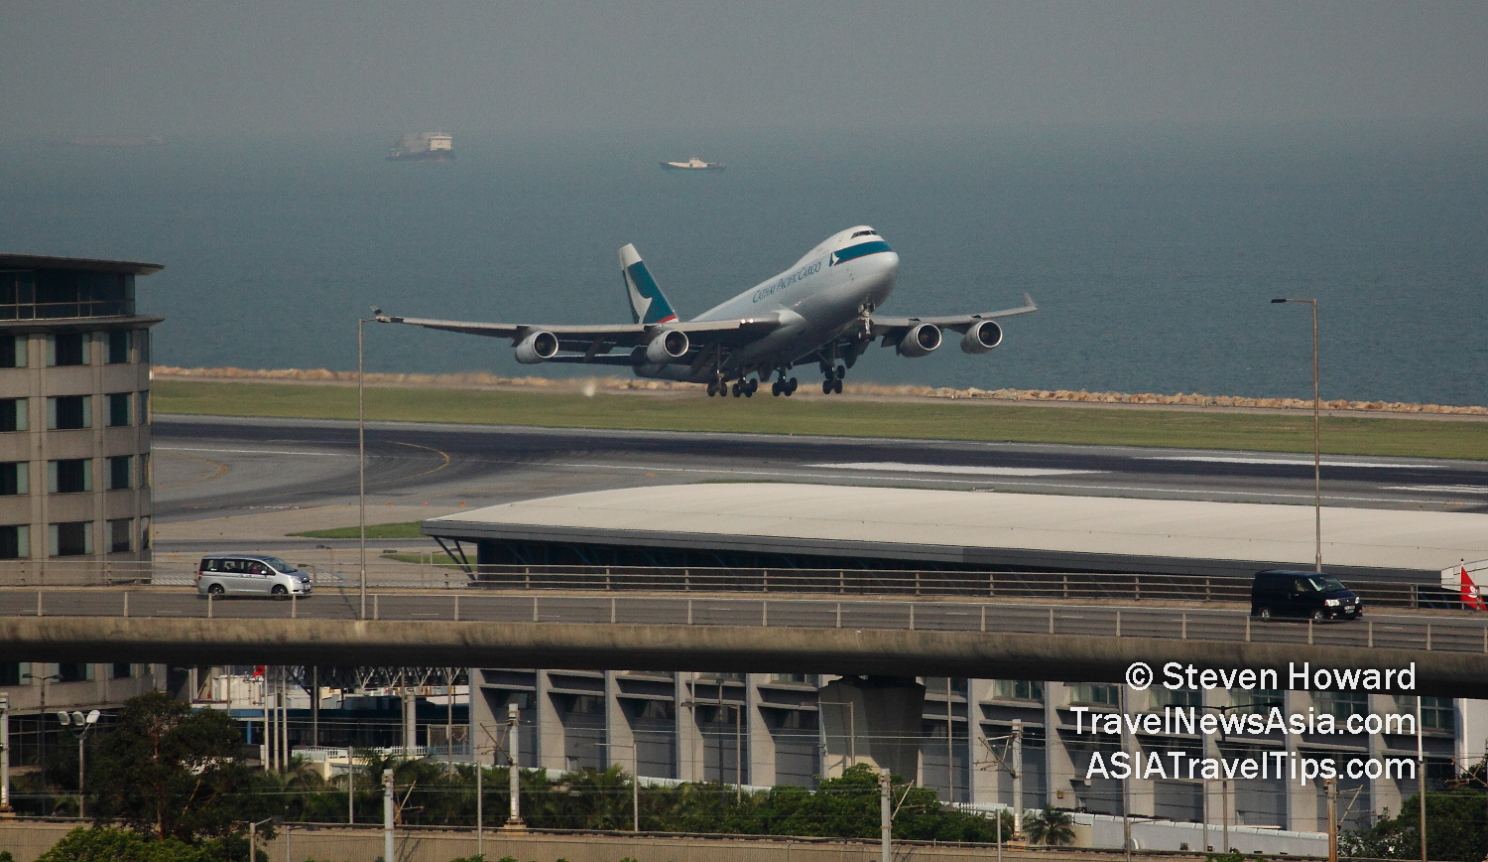 Cathay Pacific B747F taking off from HKIA. Picture by Steven Howard of TravelNewsAsia.com. Click to enlarge.